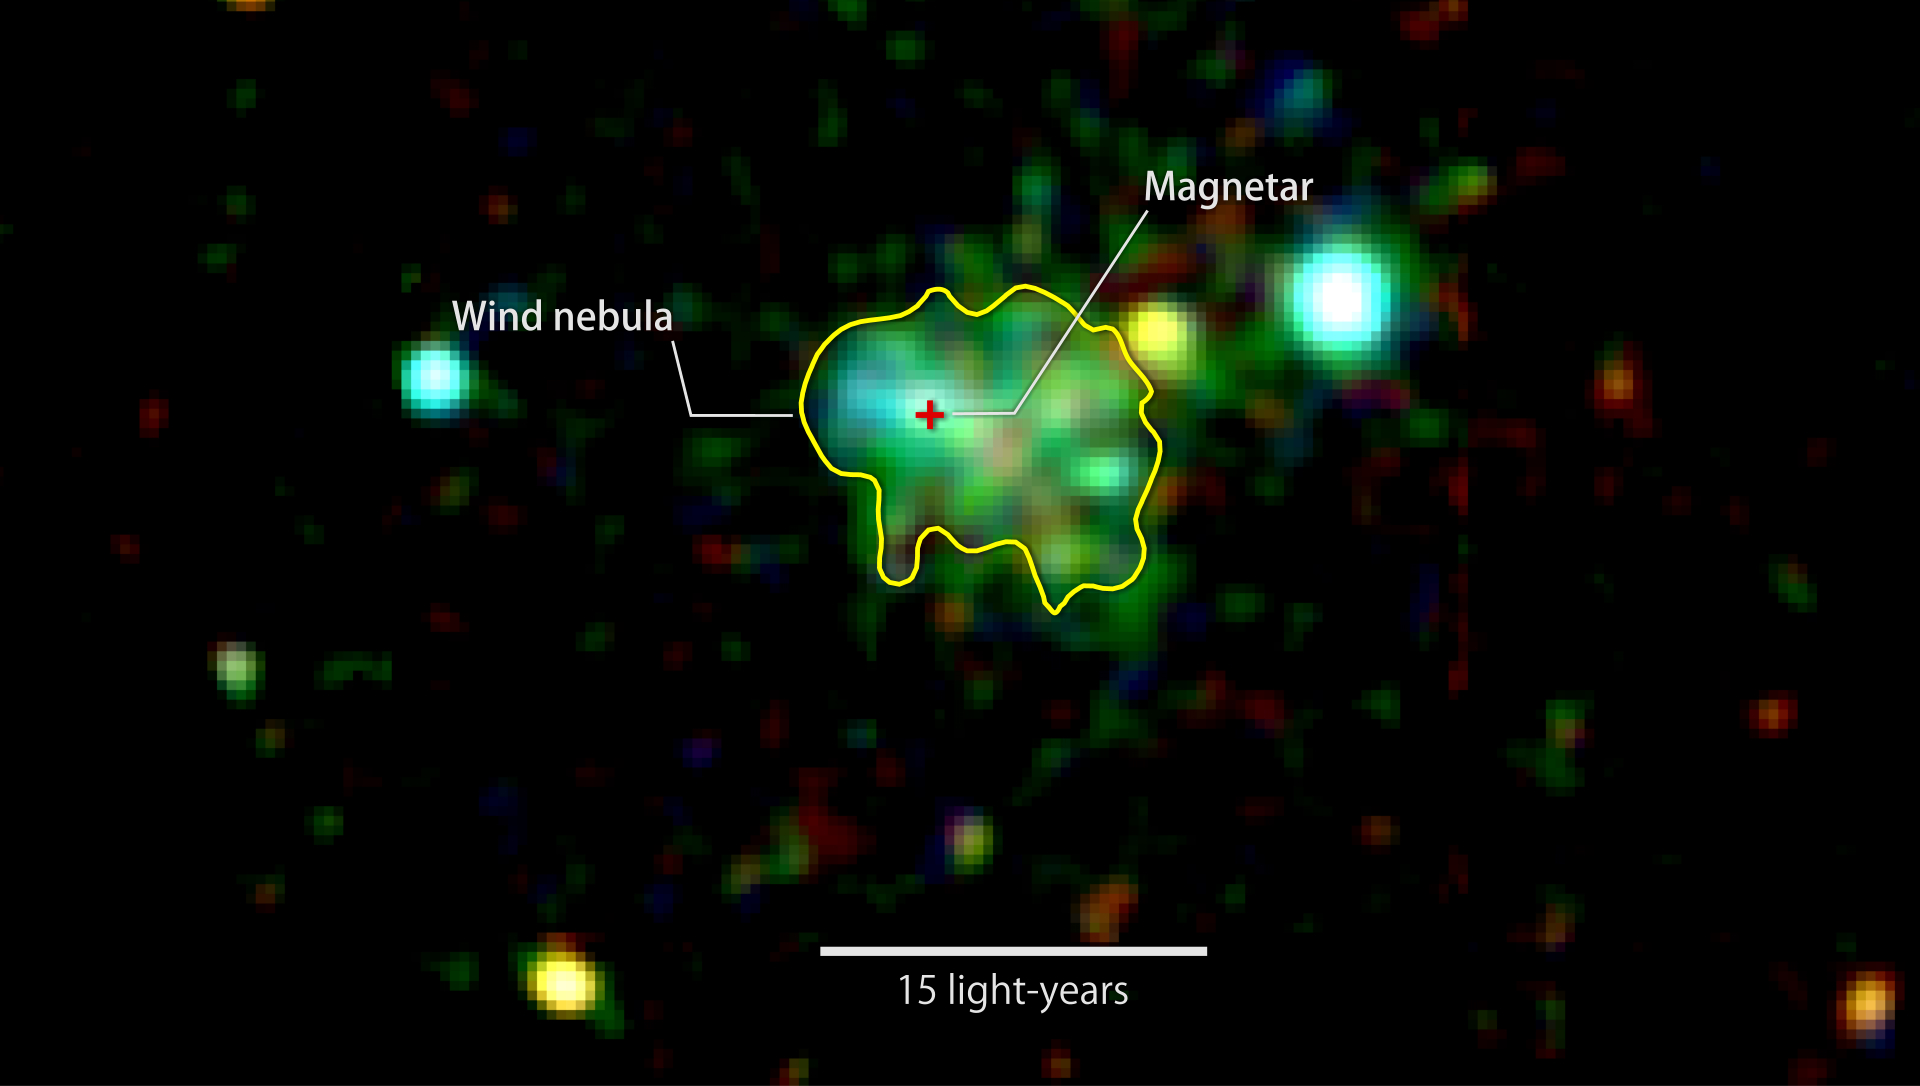 X-ray image of emission around a rare ultra-magnetic neutron star